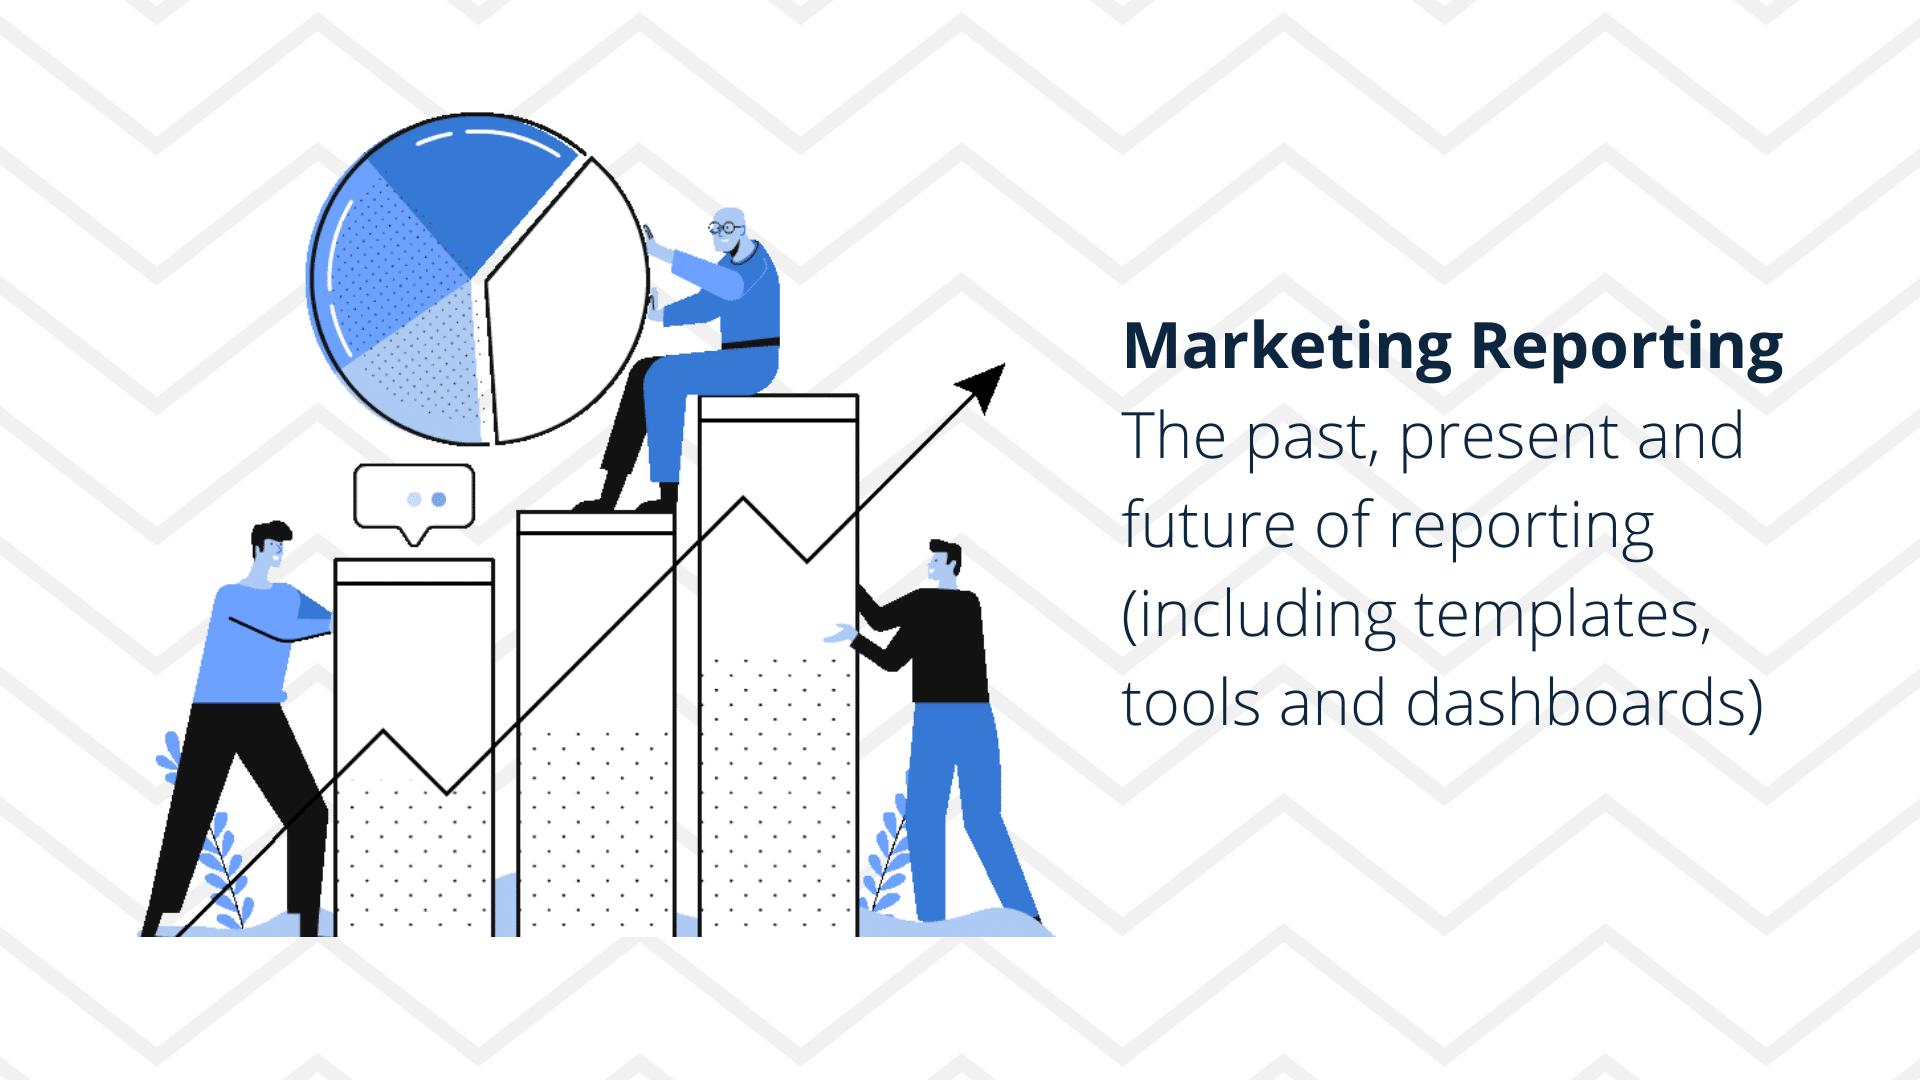 Marketing Reporting The past present and future of reporting